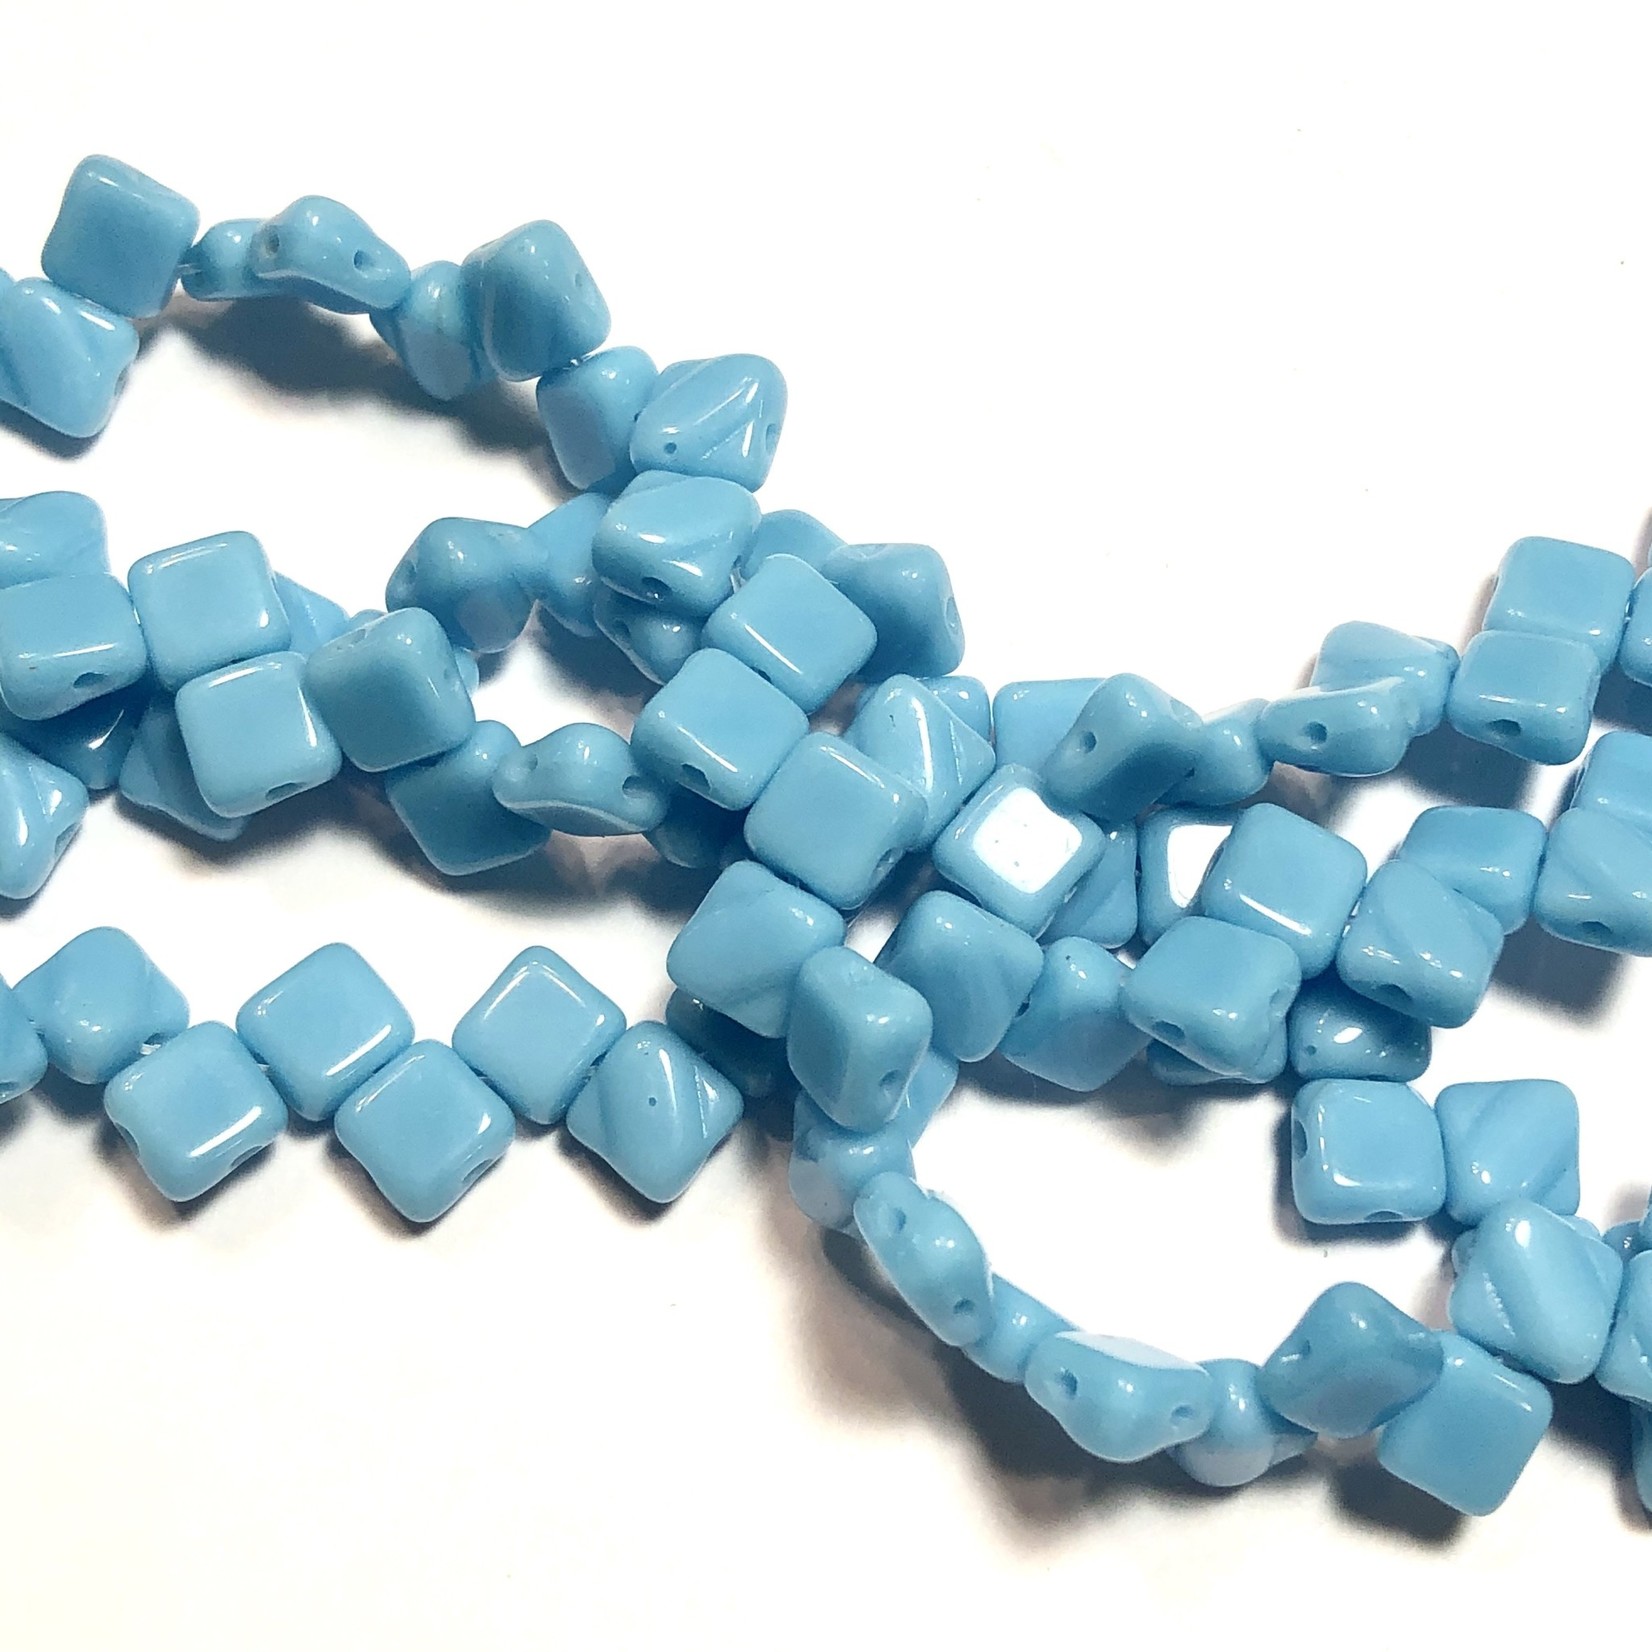 2-Hole SILKY Bead Blue Turquoise 40pcs 6.5mm